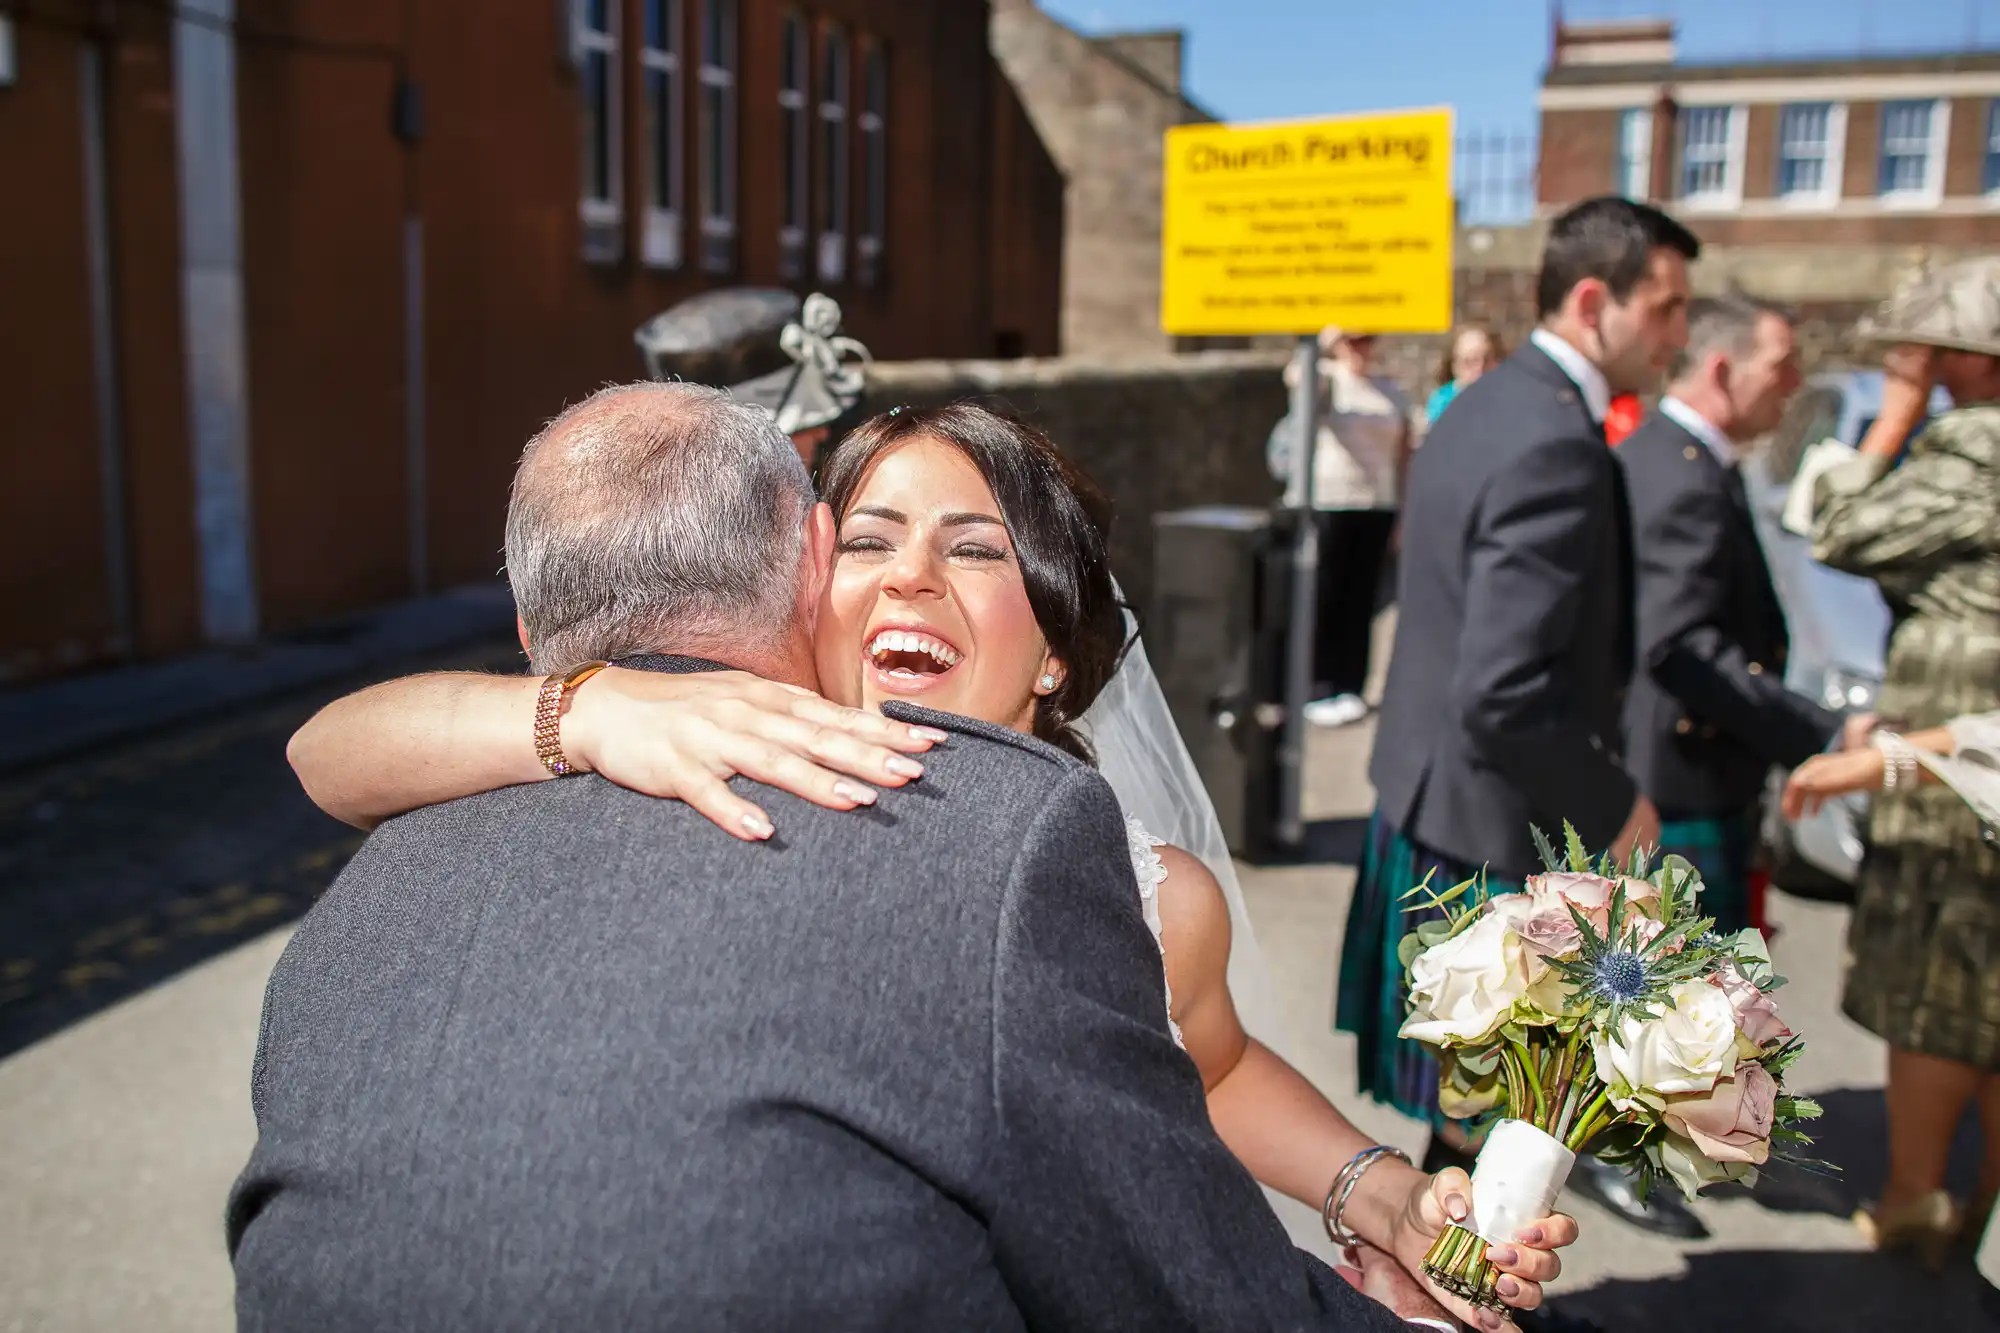 A bride joyfully hugs a guest outside a church on a sunny day, holding a bouquet, with other guests in the background.